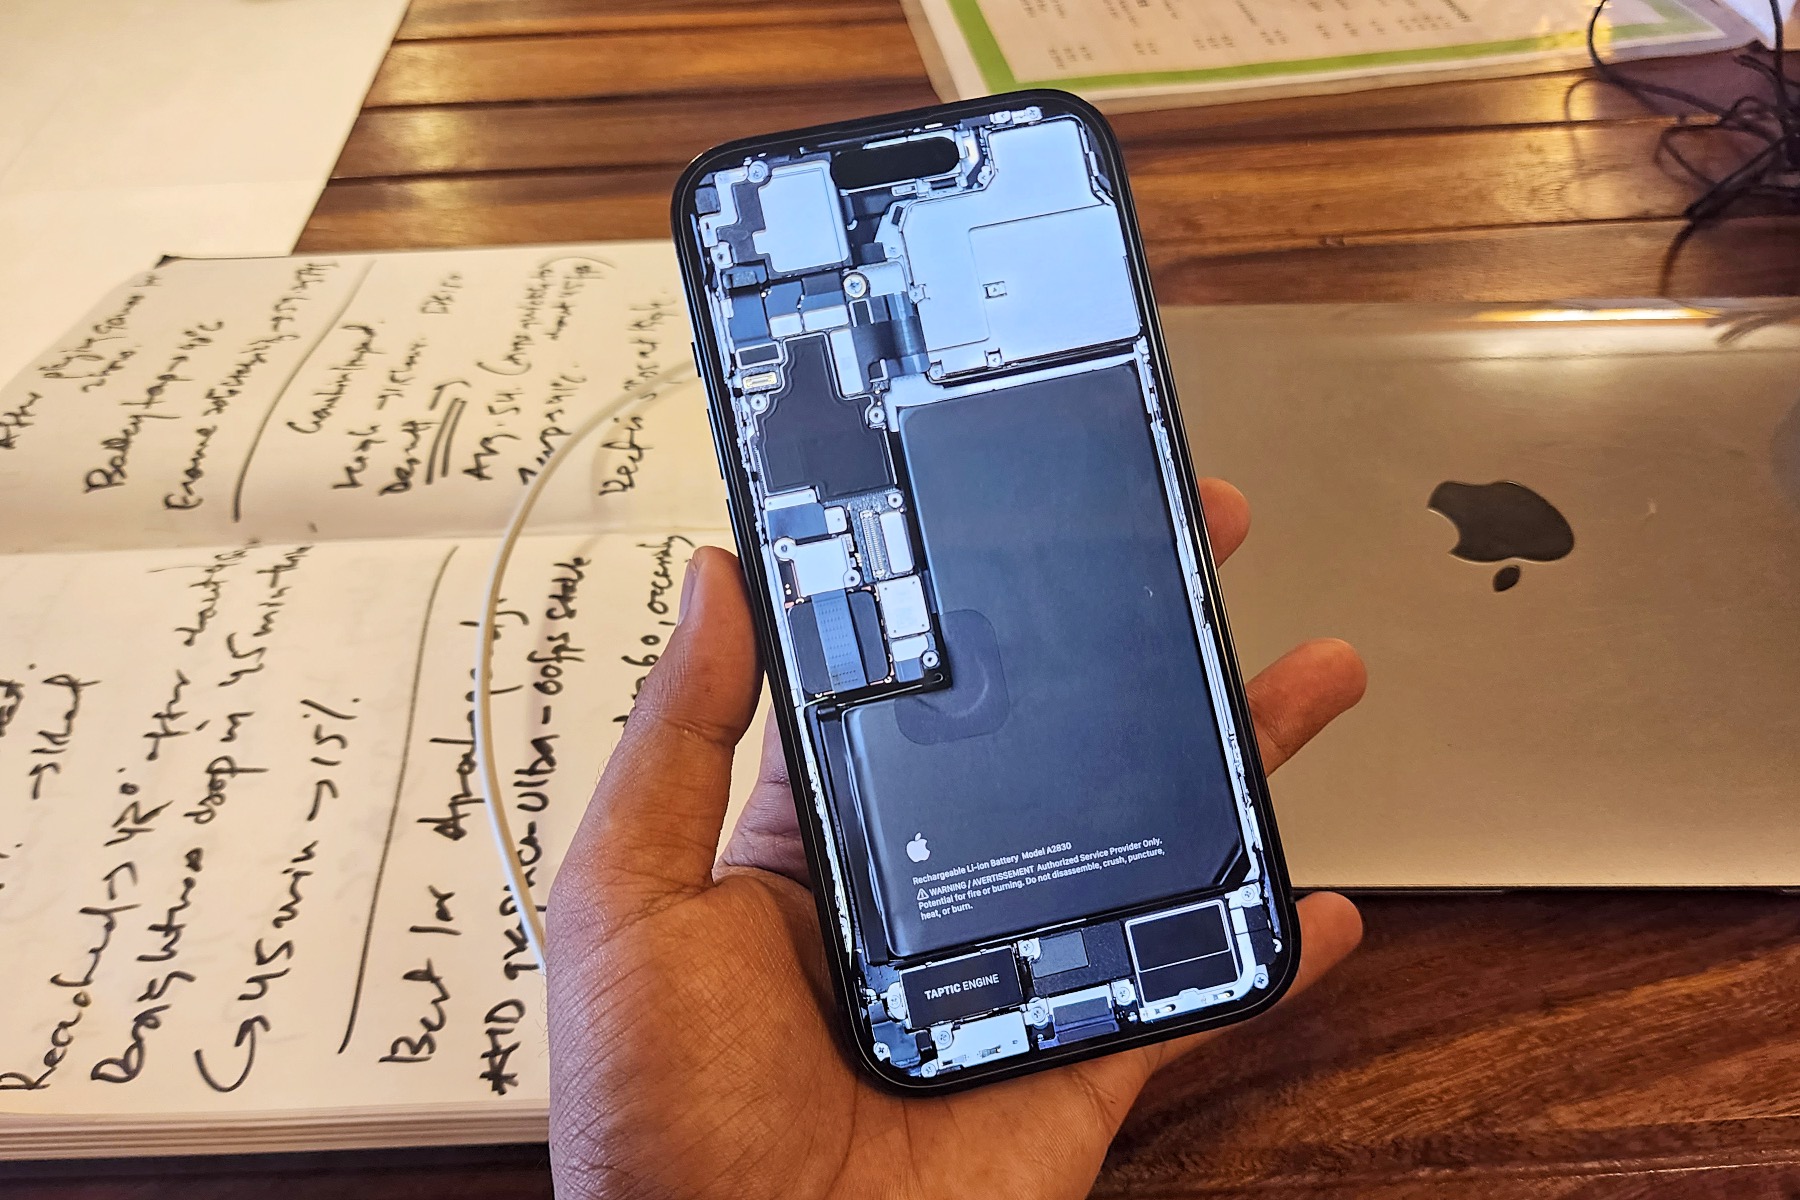 iPhone 14 Pro is a gaming beast with a burning hot problem